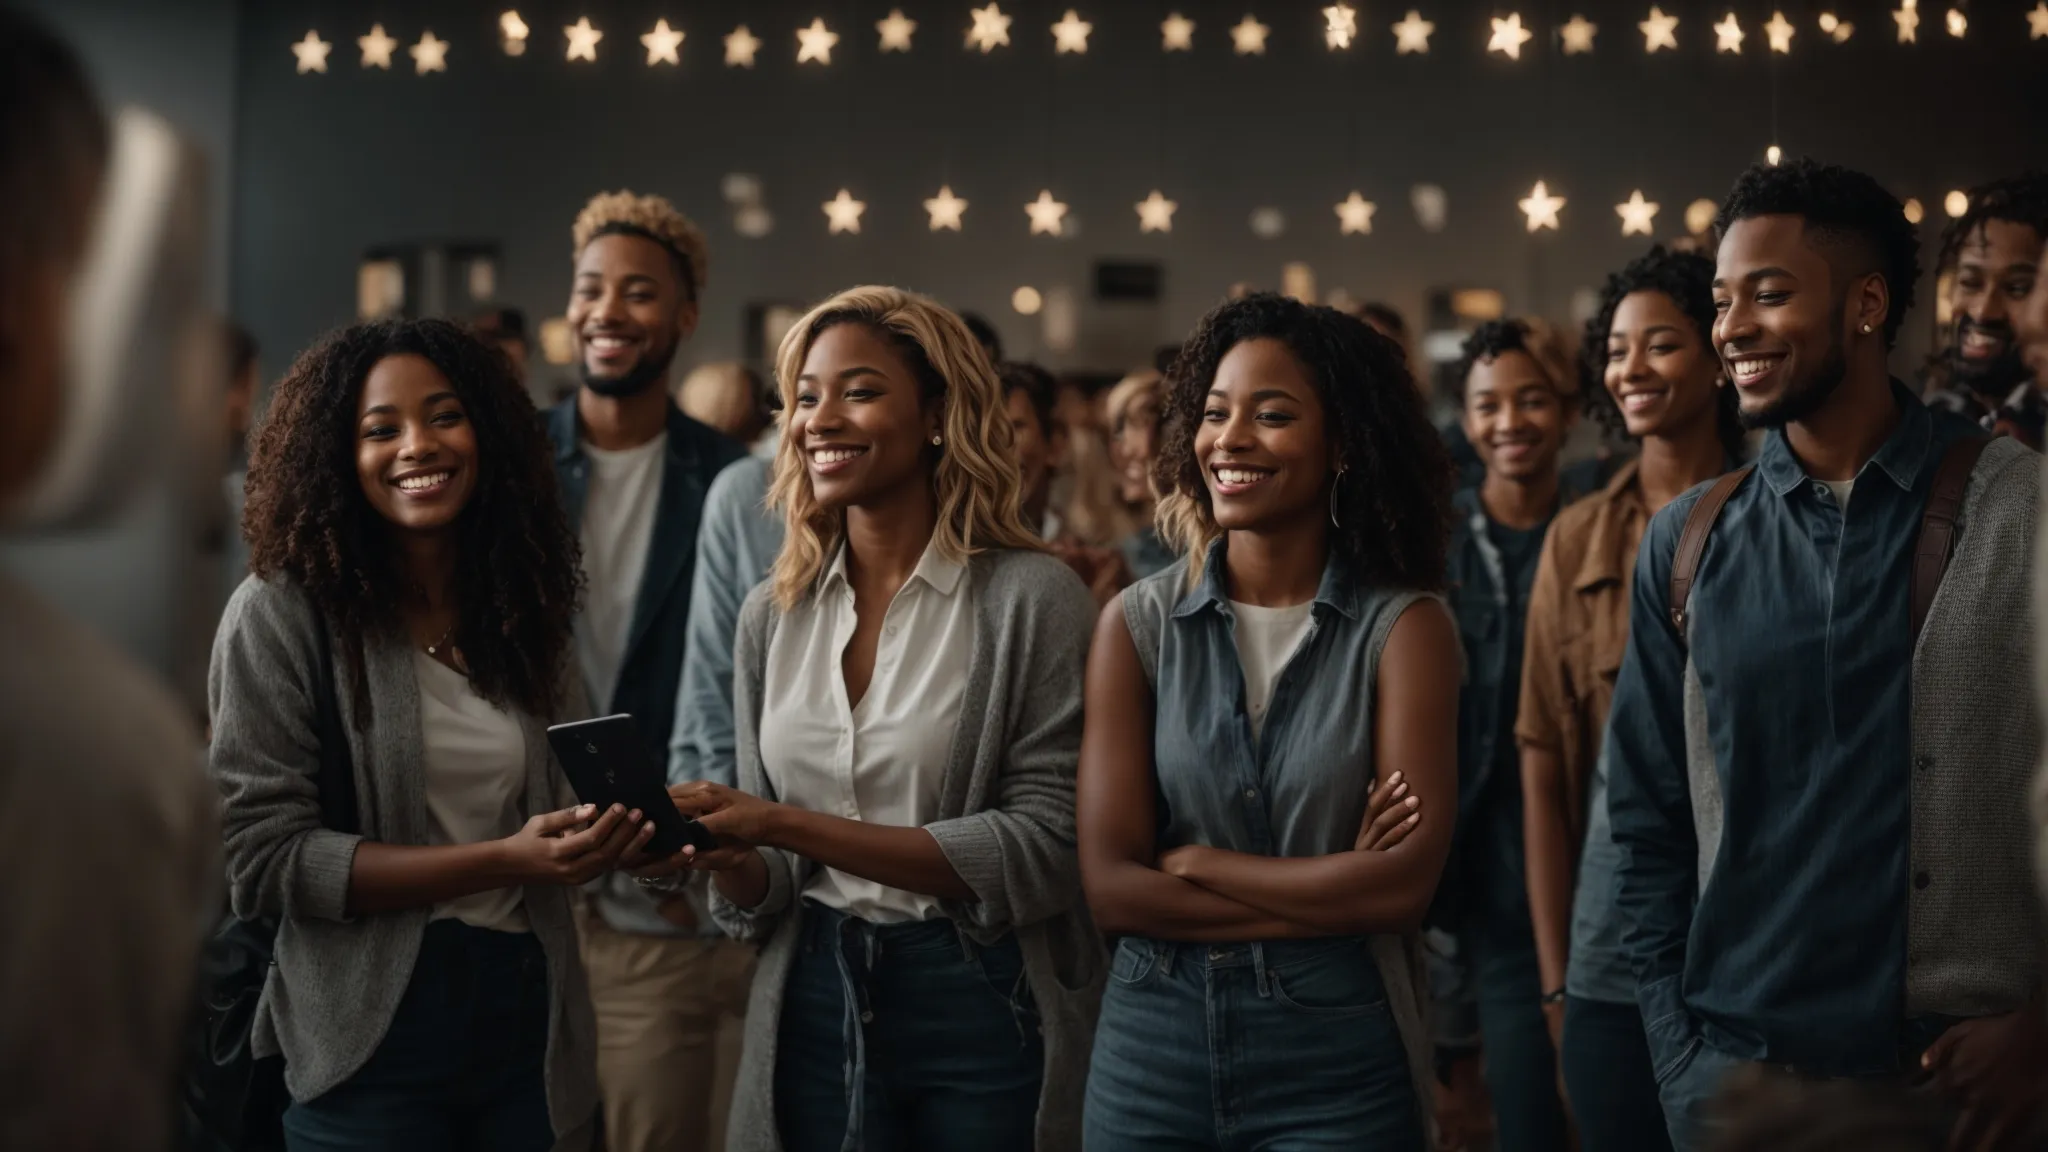 a group of diverse people smiling and engaging with a digital interface displaying star ratings and positive user feedback.